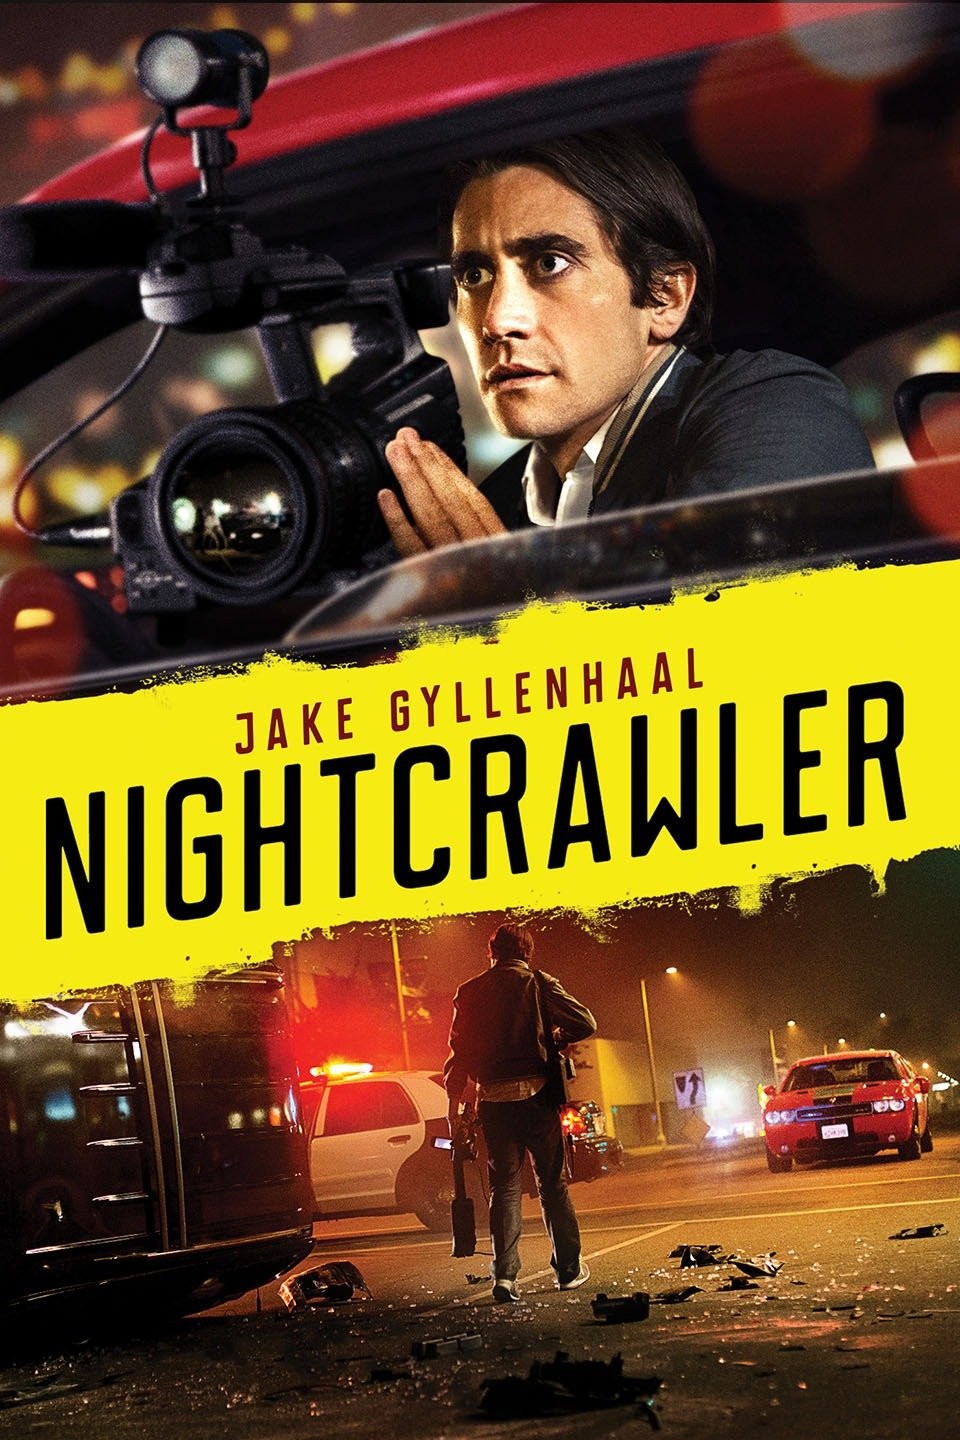 Will there be a Nightcrawler 2? What would Lou Bloom be doing now